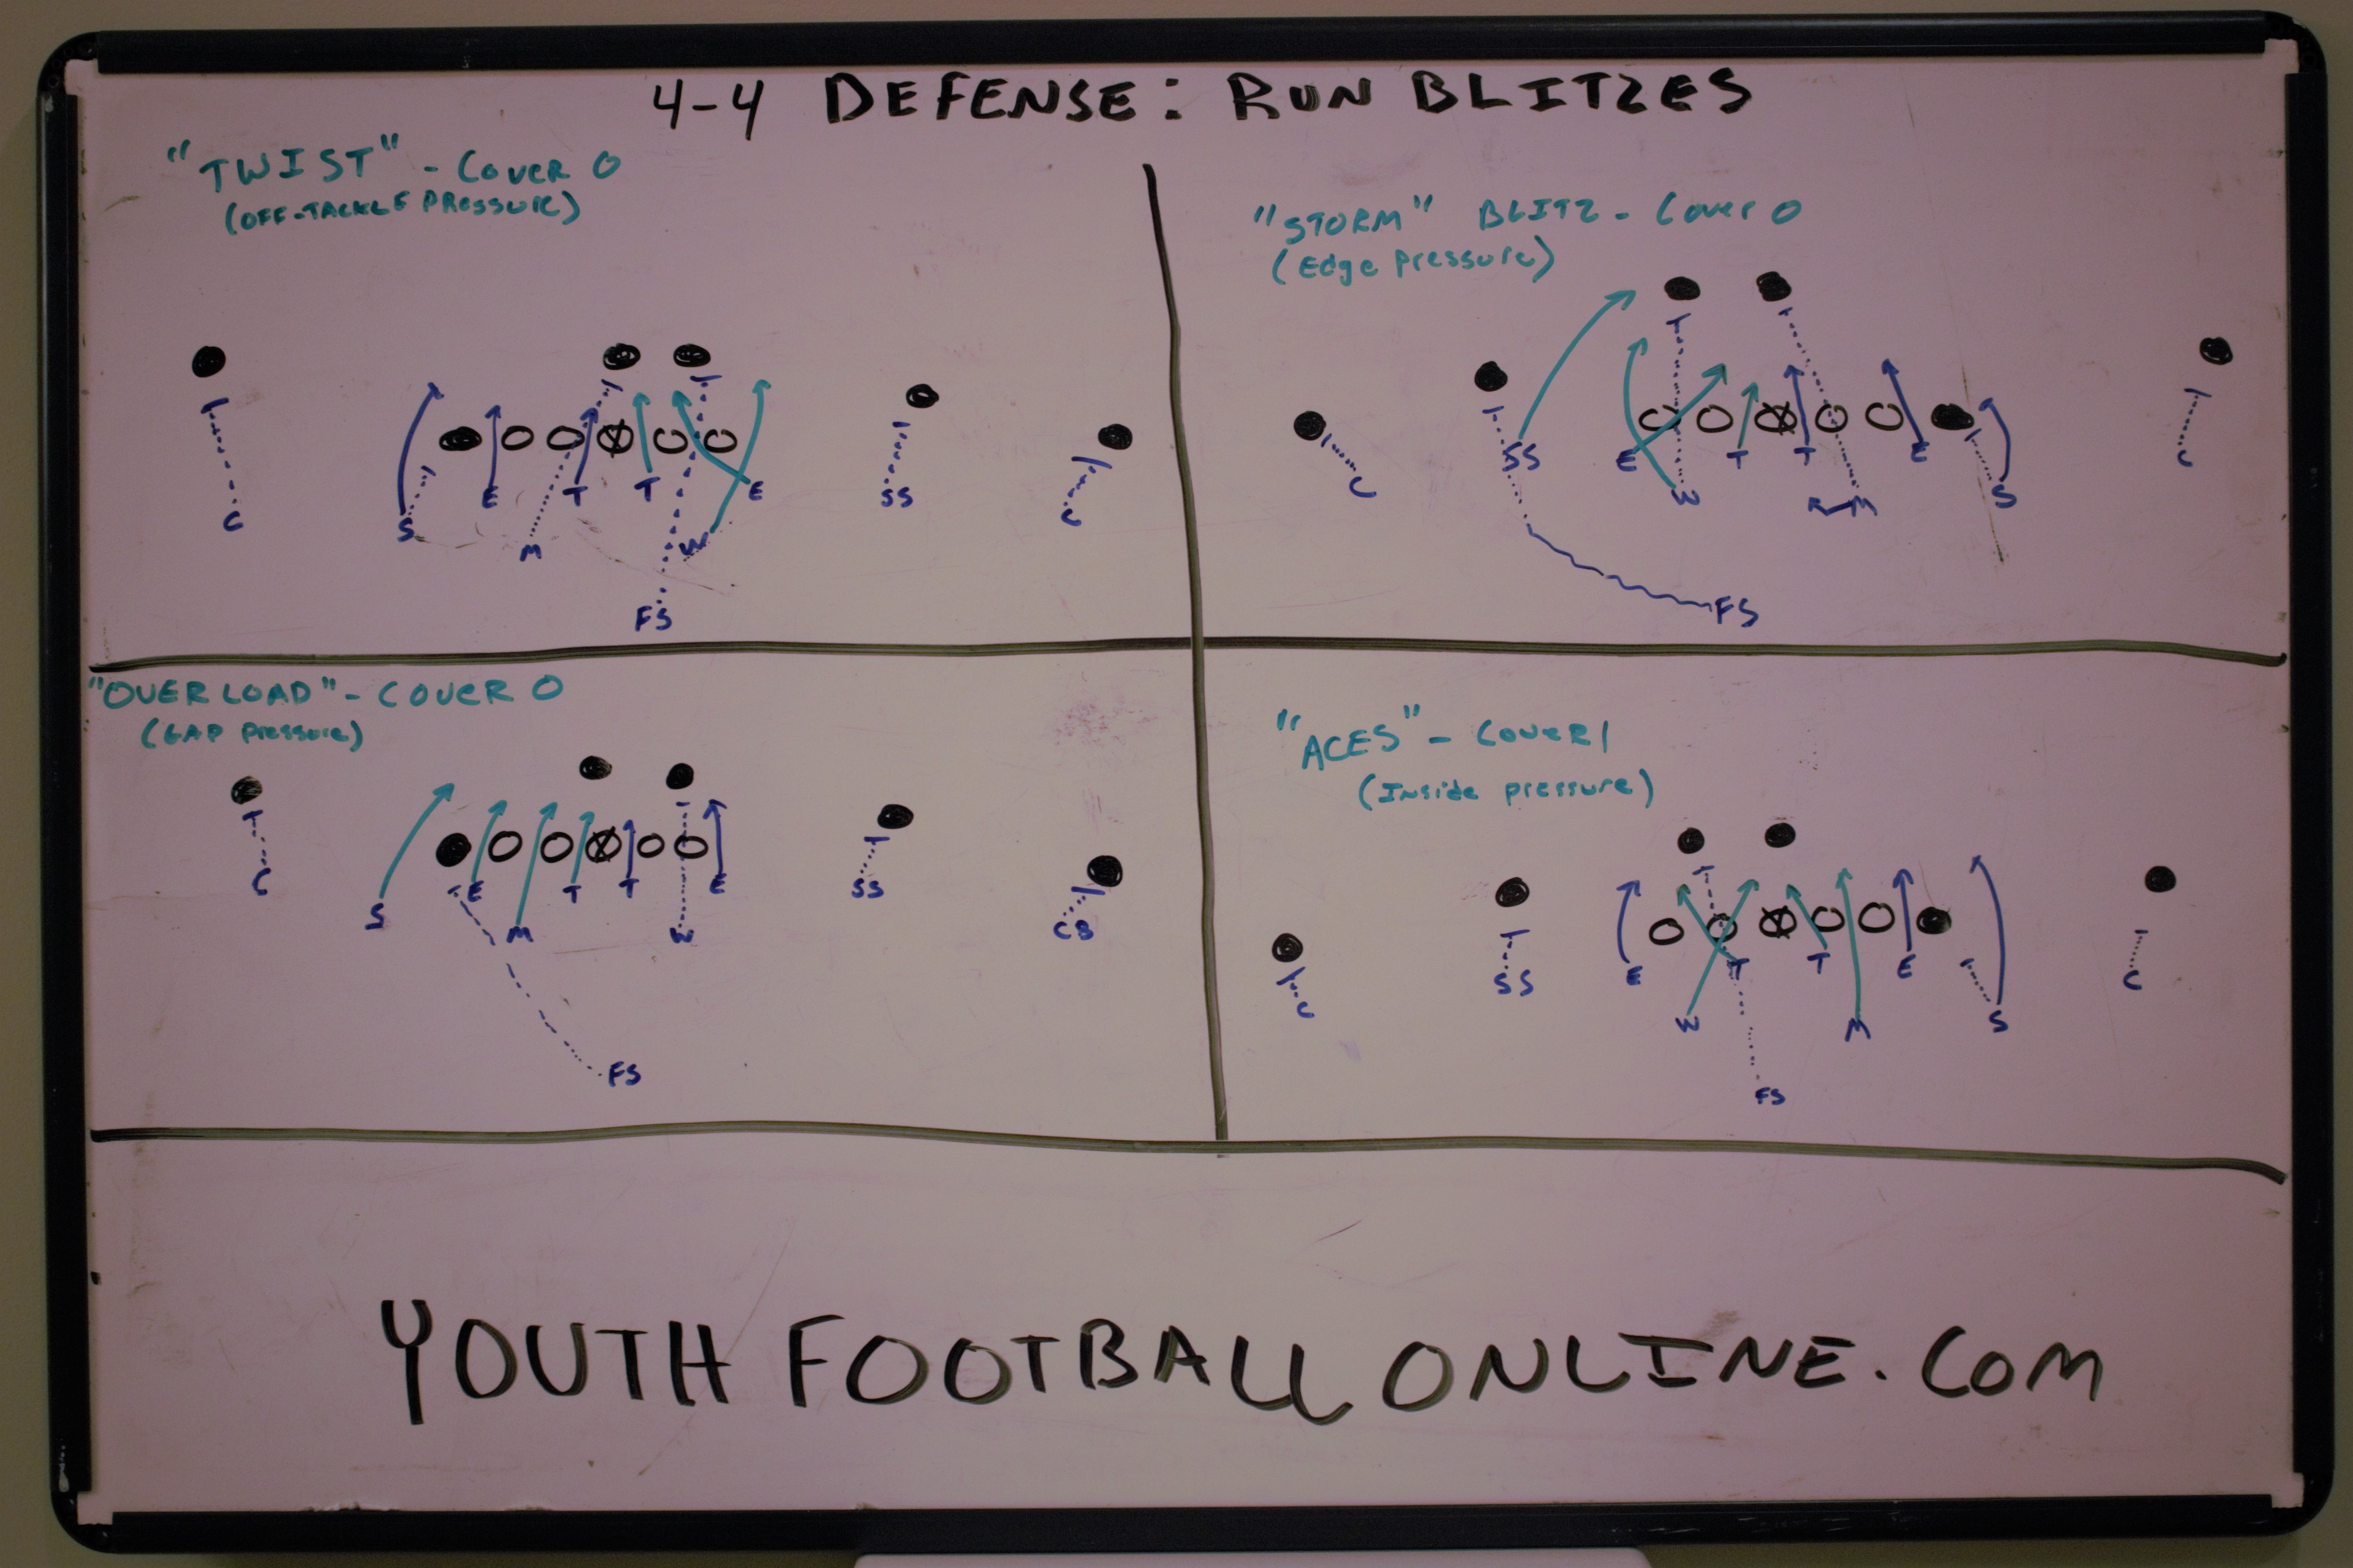 4-4 Defense Blitz Packages For Youth Football